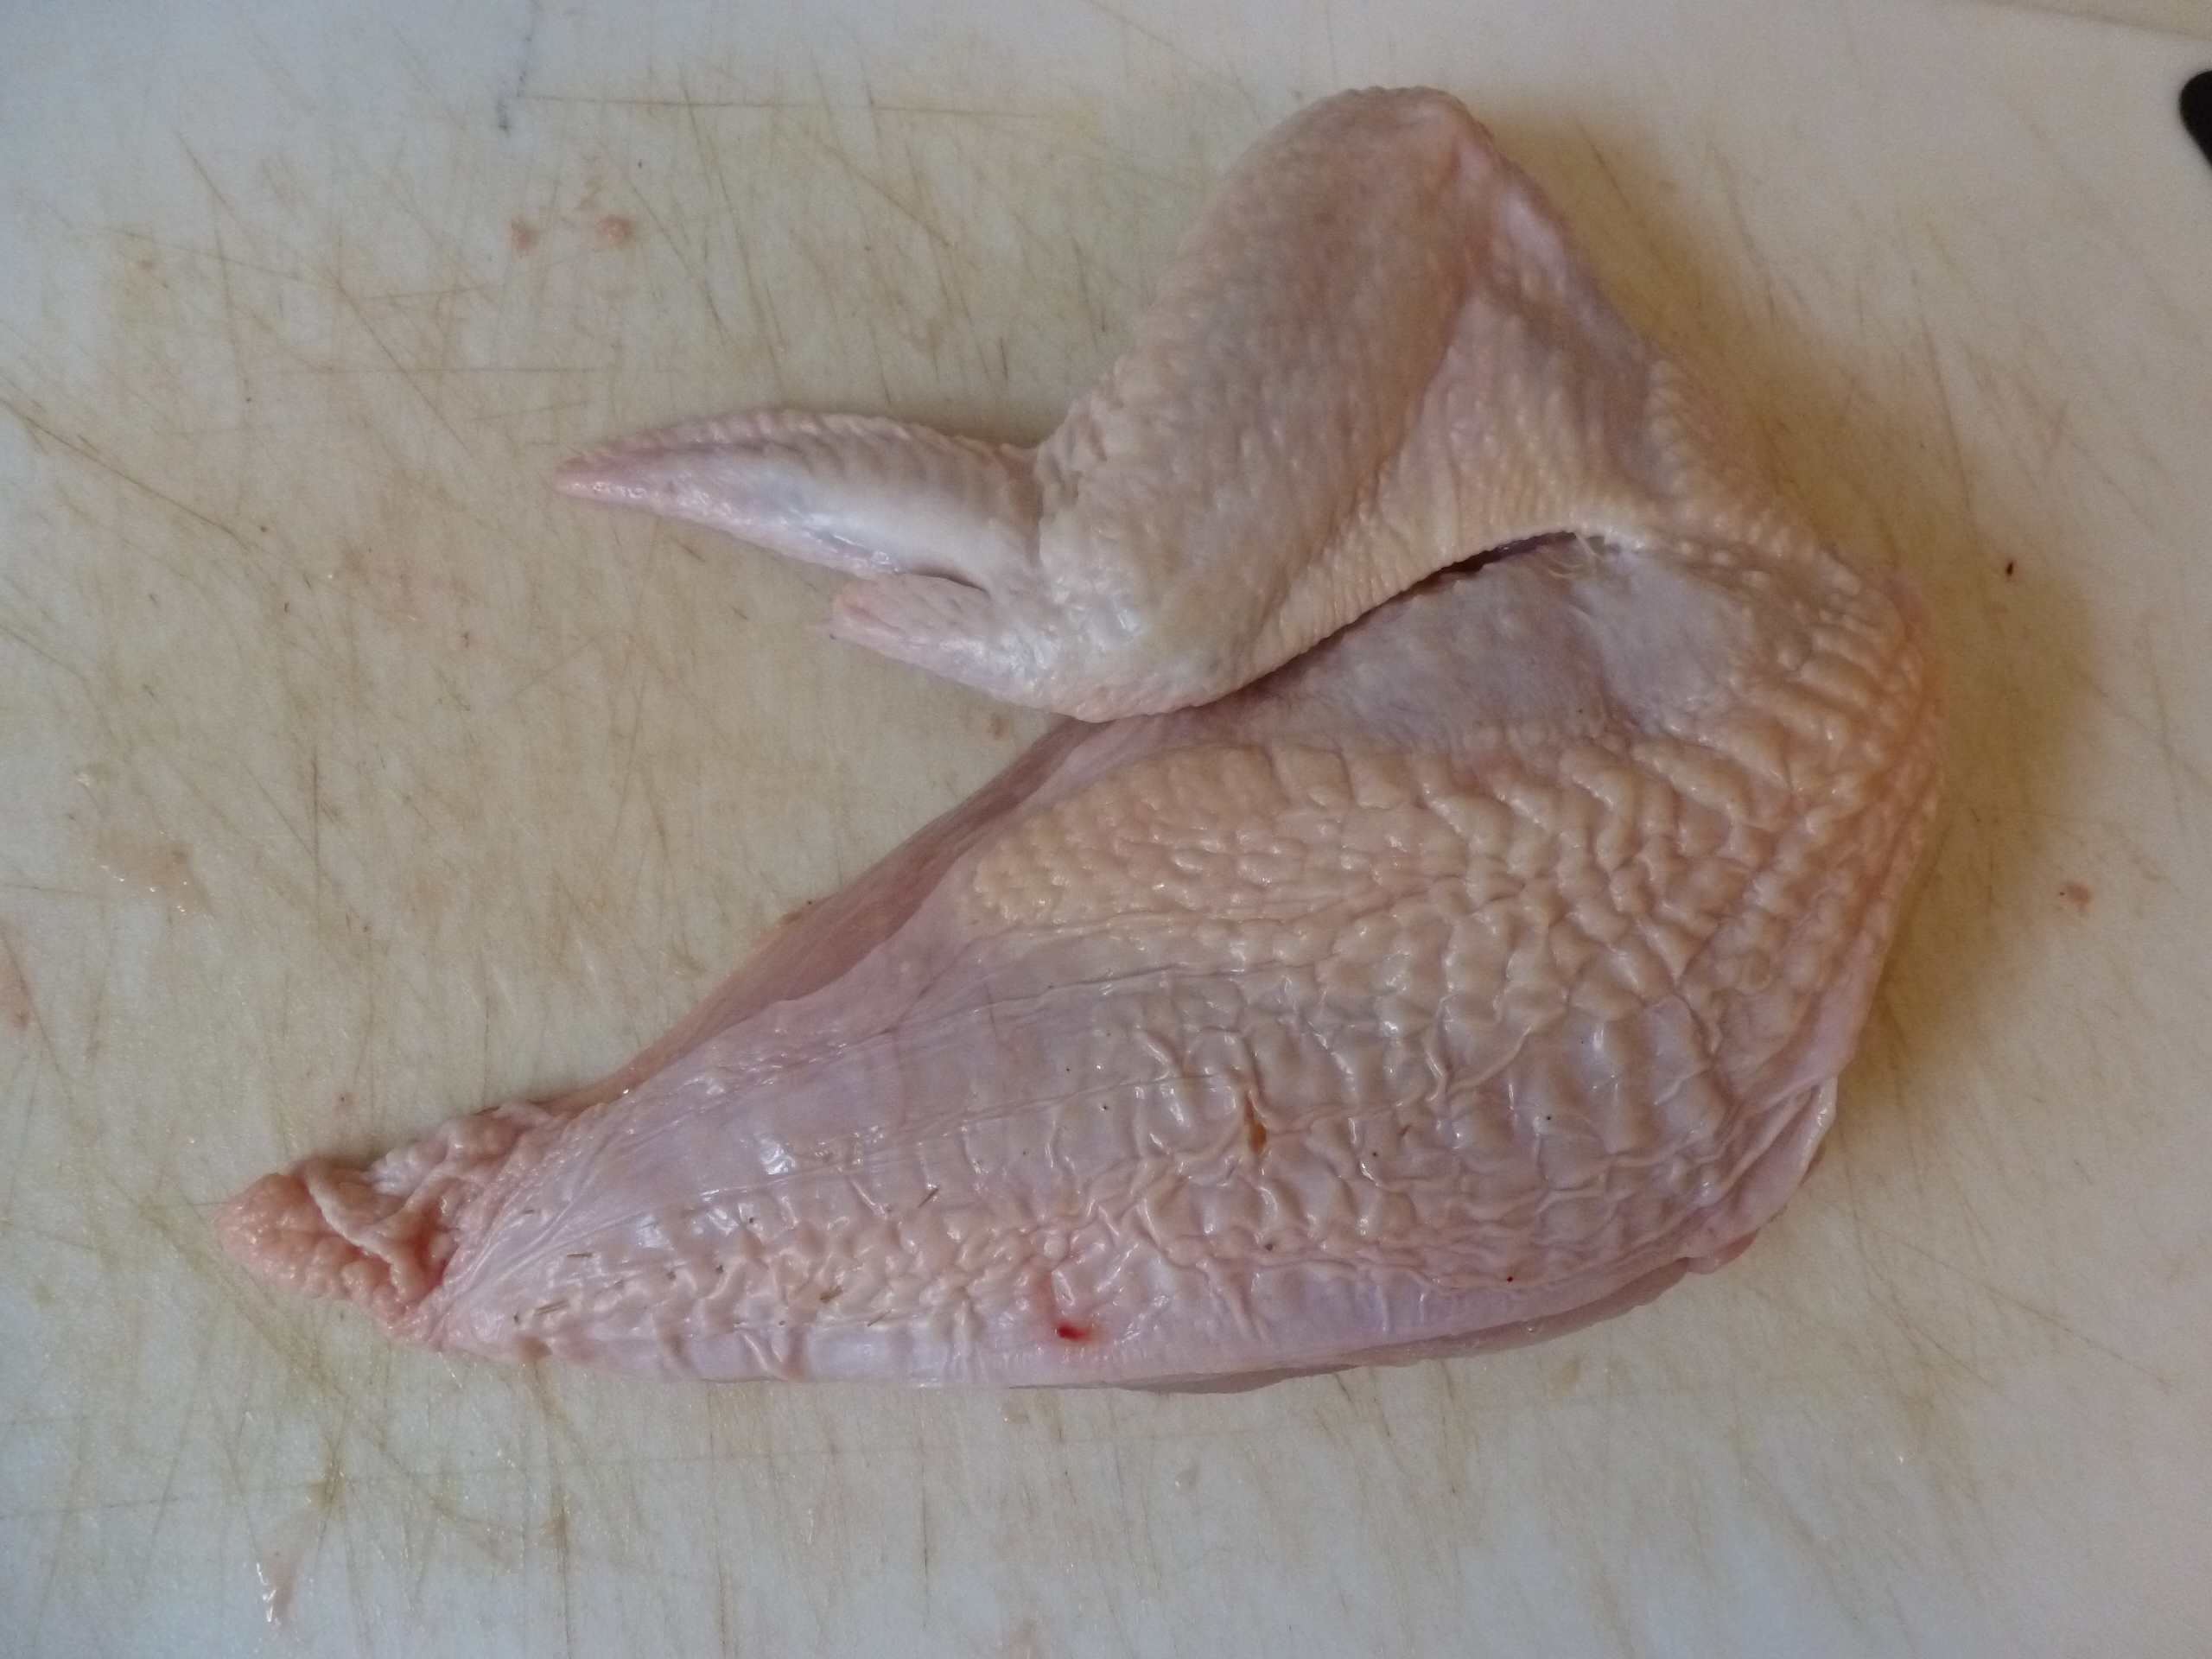 The chicken breast, with wing attached